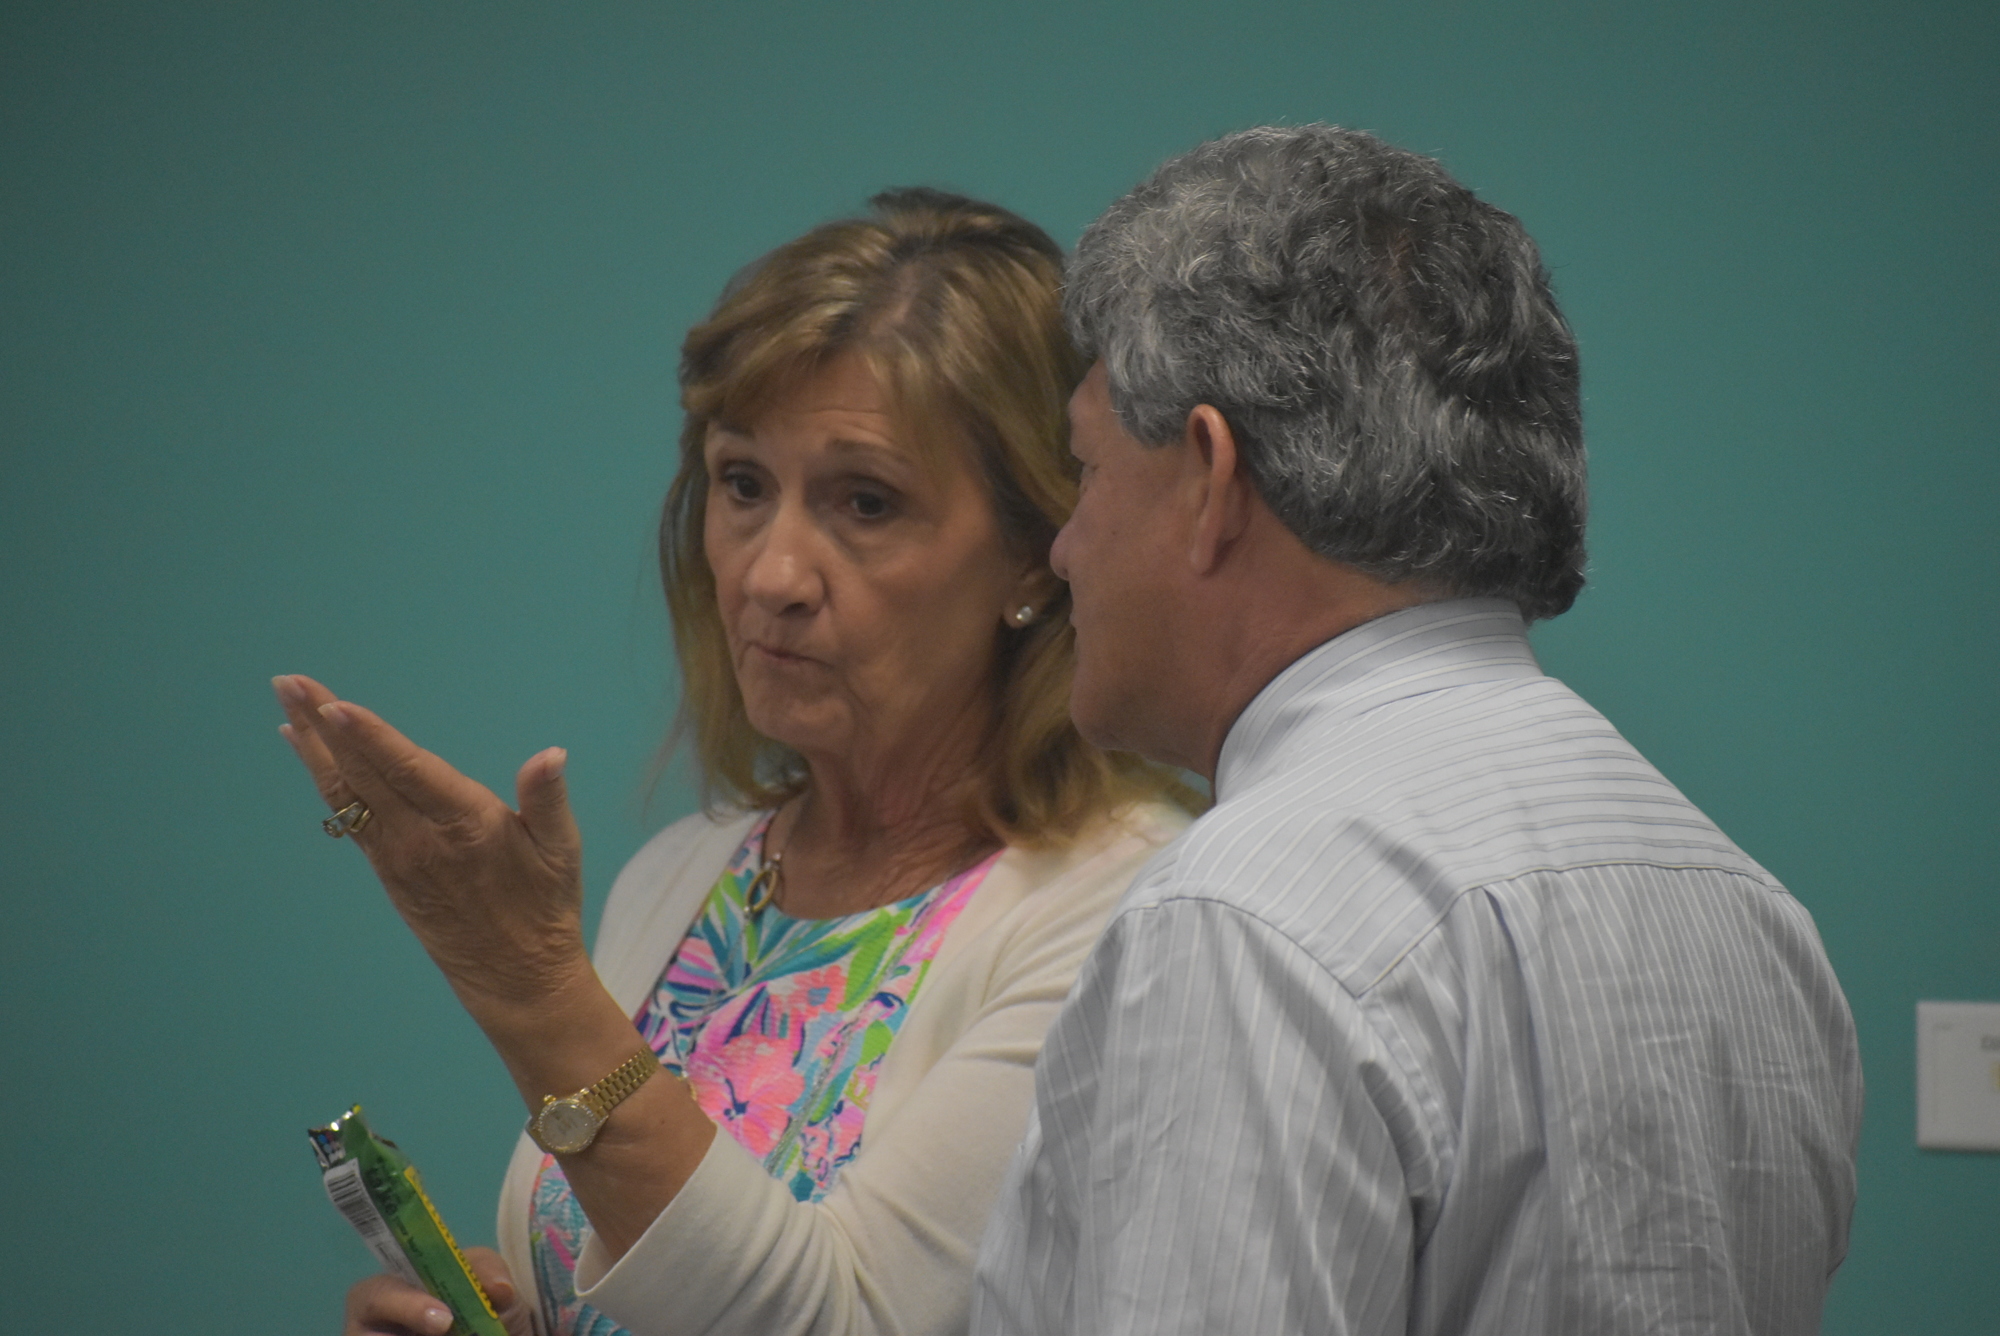 Commissioner Vanessa Baugh, pictured talking with Administrator Scott Hopes, said commissioners should take a close look at the future East County library's budget and ensure every item is necessary for the library's success.